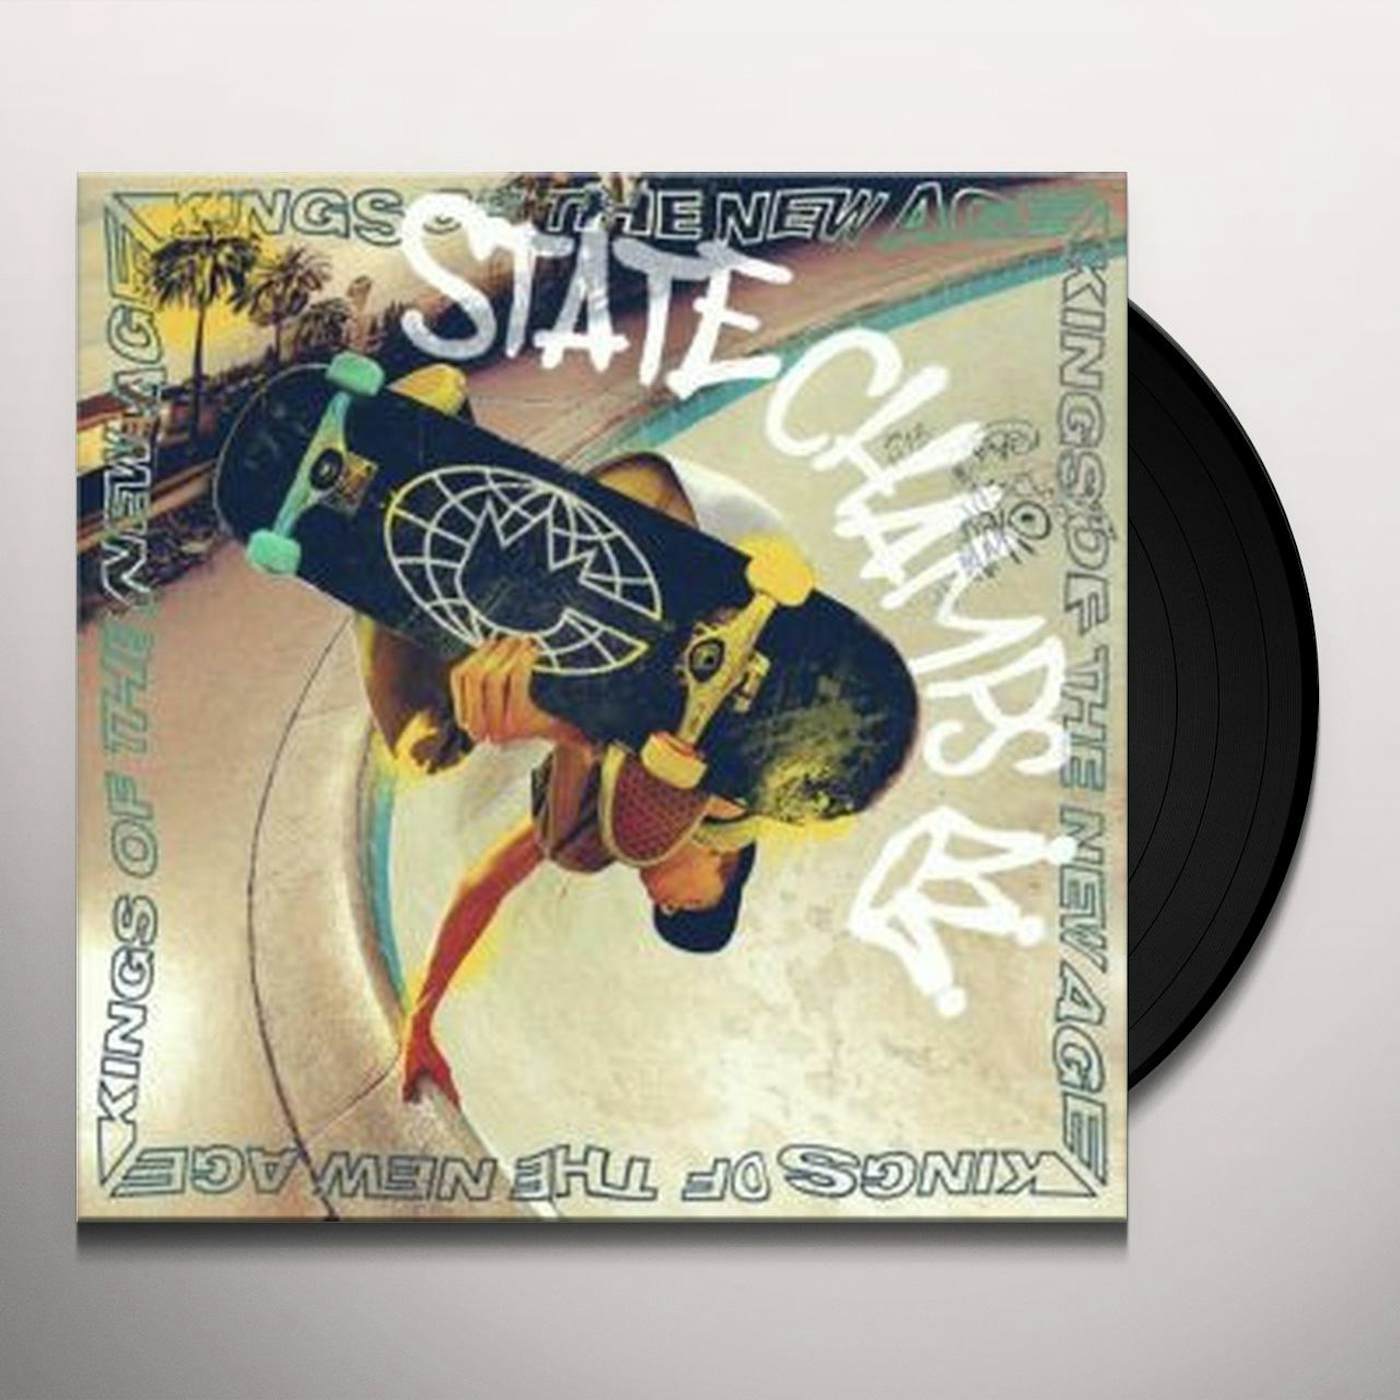 State Champs Kings of the New Age Vinyl Record